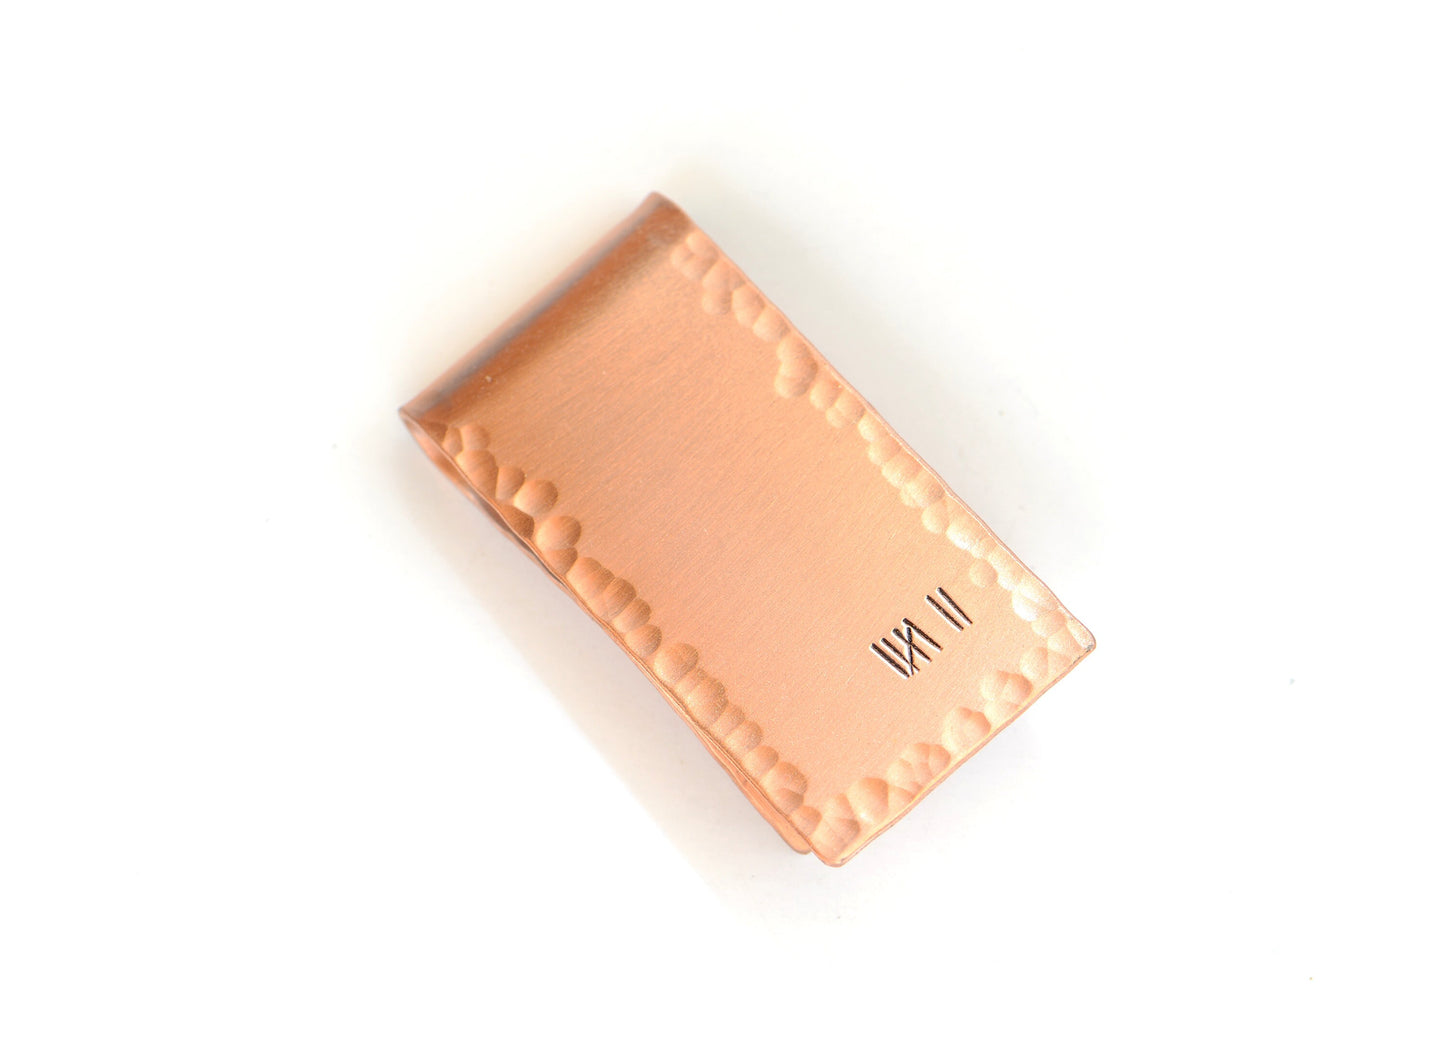 Copper money clip for the 7th anniversary with 7 tally marks to keep track